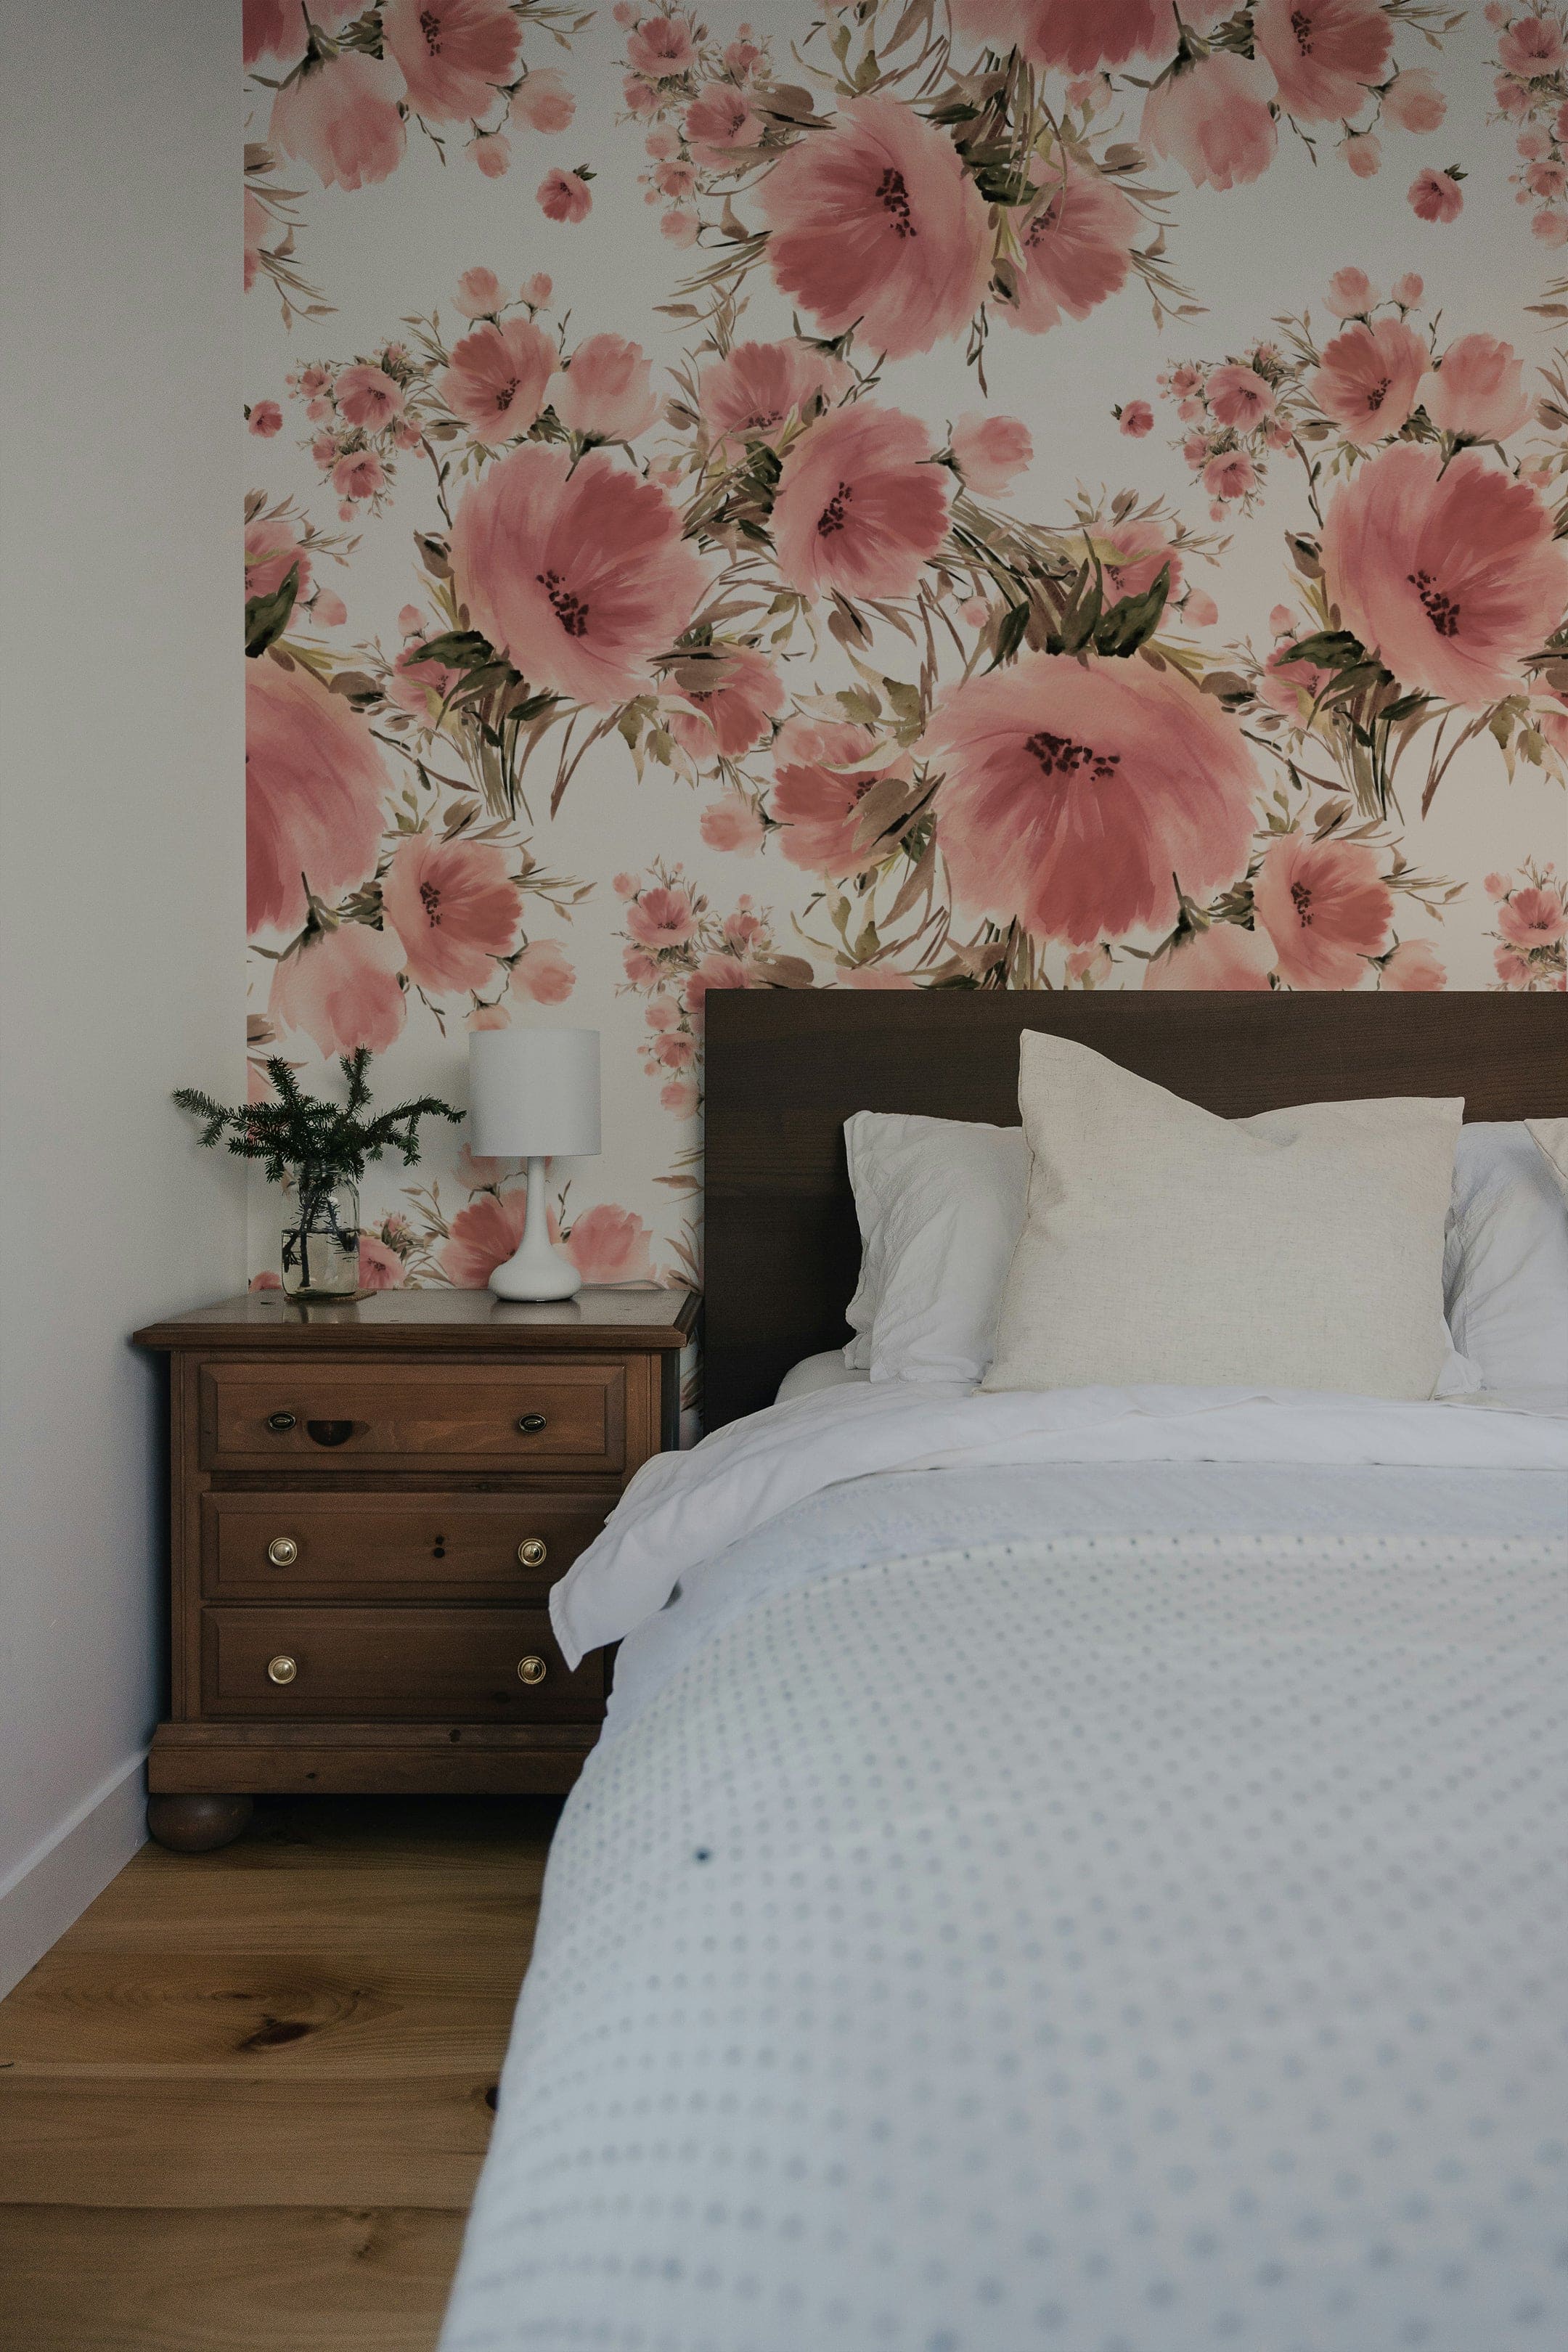 A bedroom interior showcasing one wall adorned with 'Grace Floral Wallpaper', which features large pink flowers and soft green leaves. The room includes a wooden bed with white bedding, a small wooden nightstand with a white lamp and a small pine tree decoration, creating a cozy and inviting atmosphere